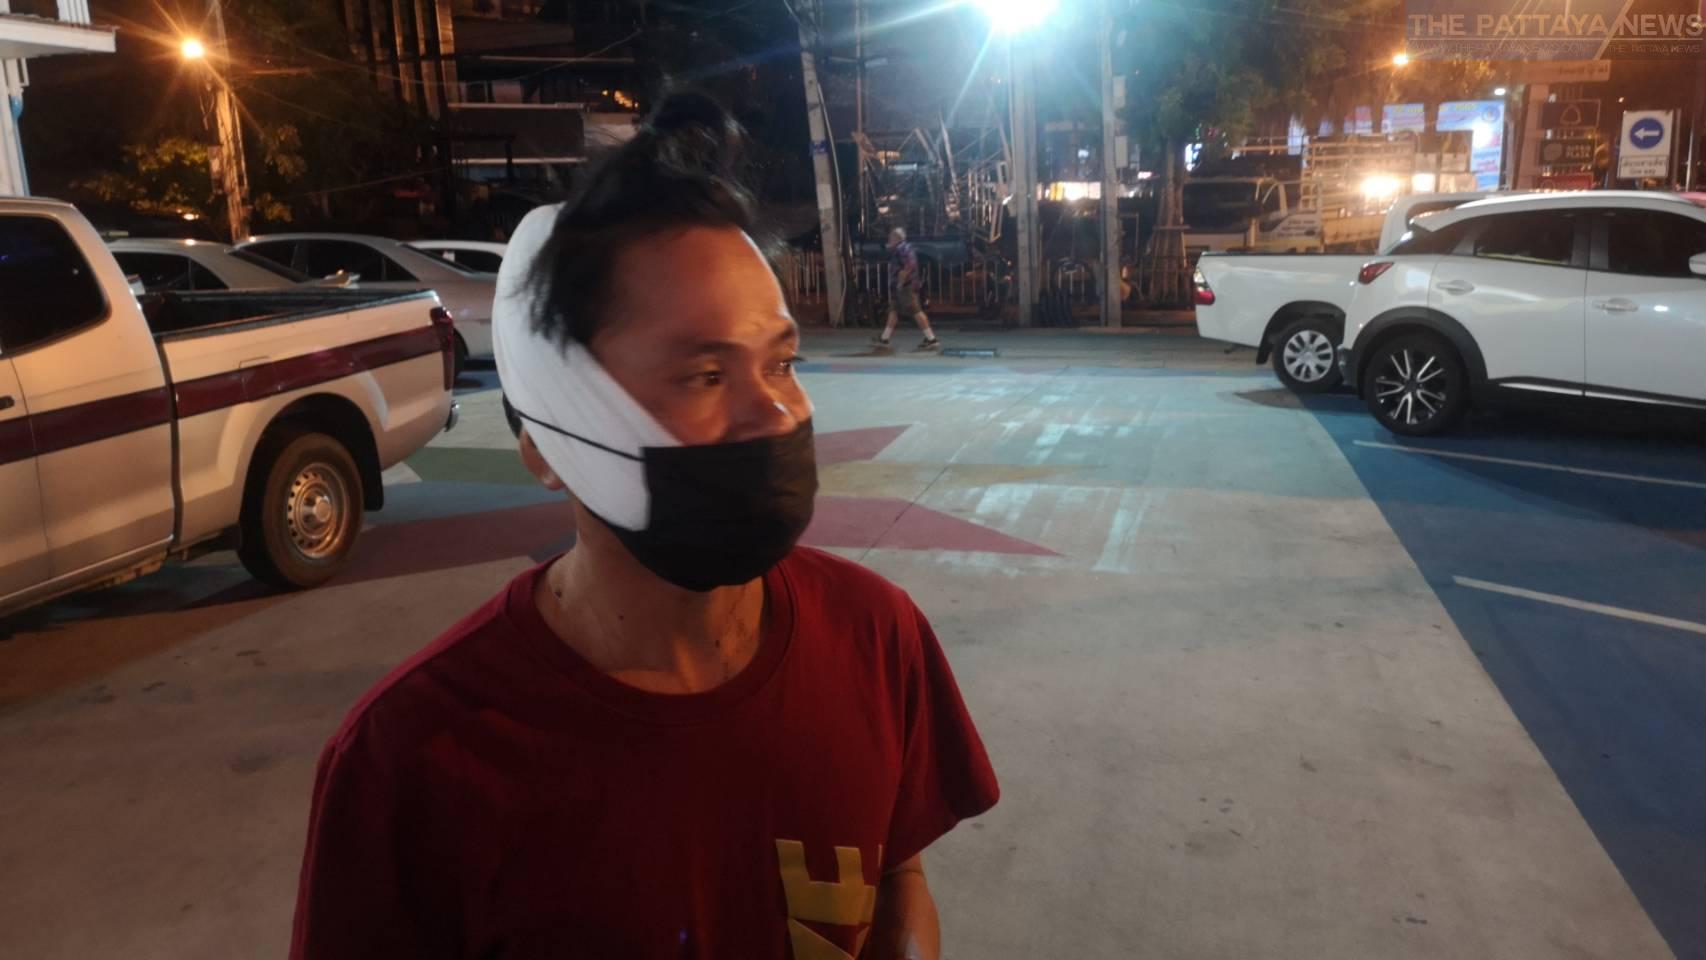 Laotian man in Pattaya allegedly assaulted with a helmet for asking his neighbor about a Lazada delivery